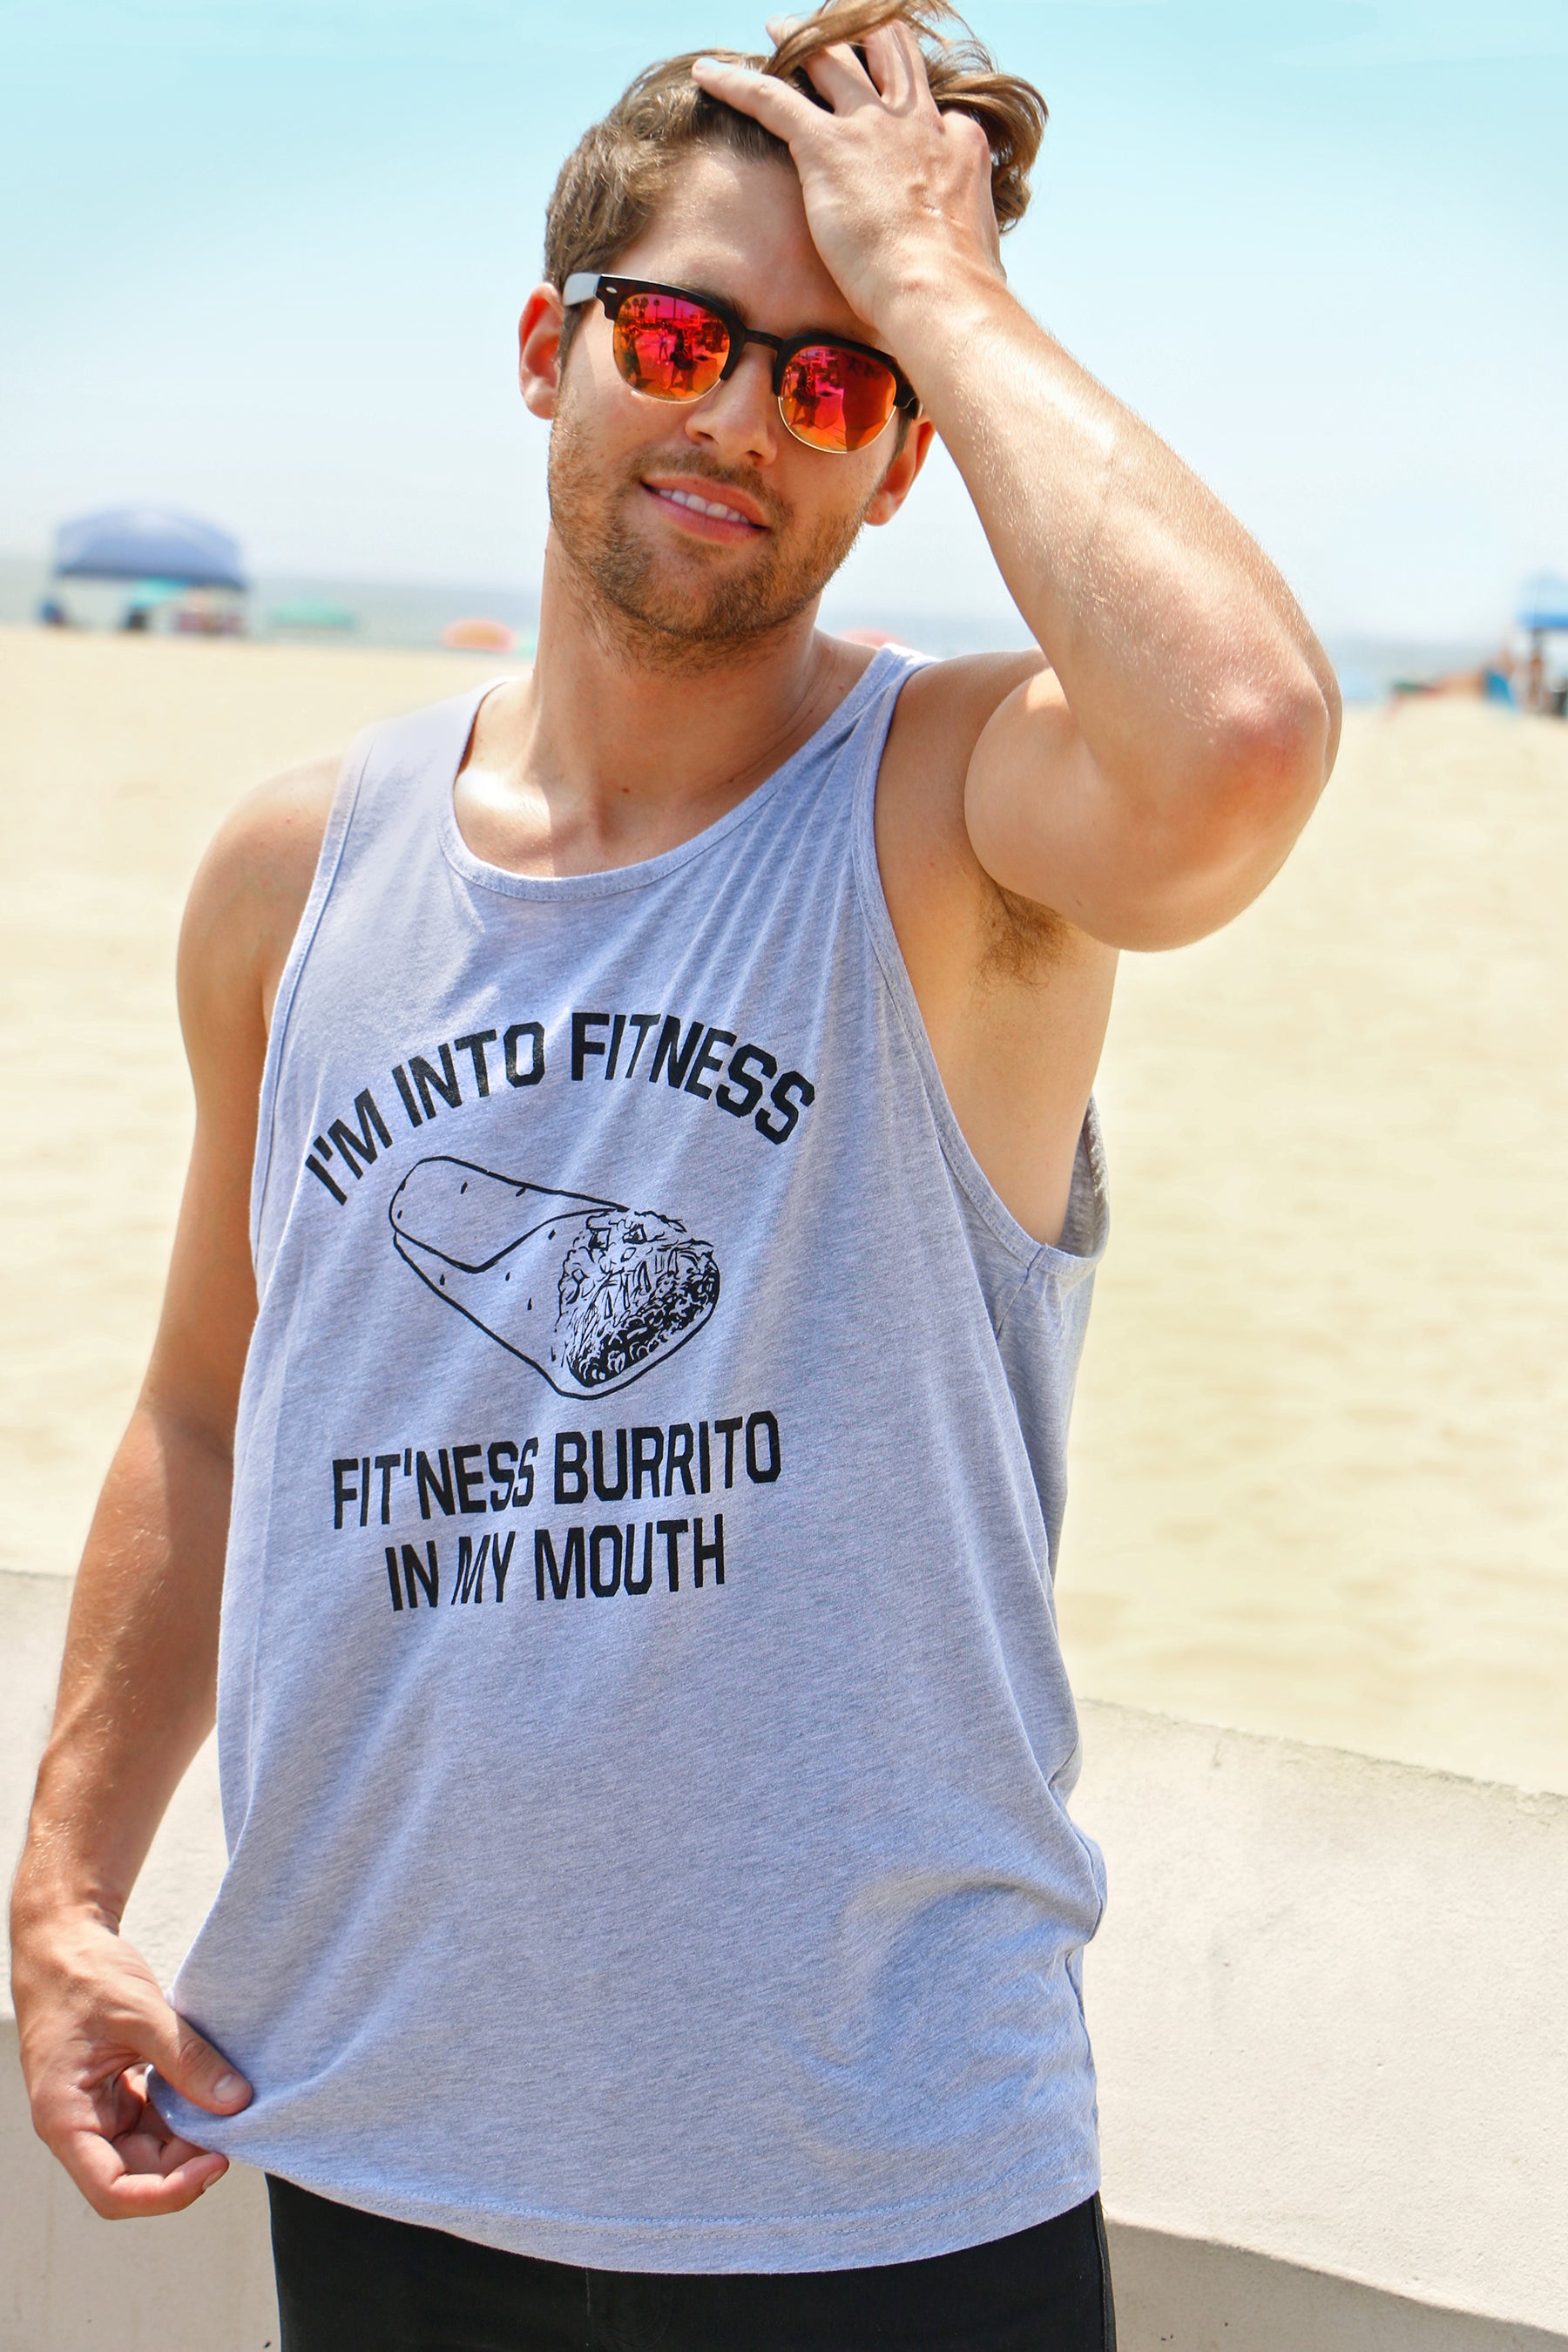 Mens Fitness Tank I Only Do Butt Stuff at The Gym Funny Sarcastic Fitness Workout Tanktop